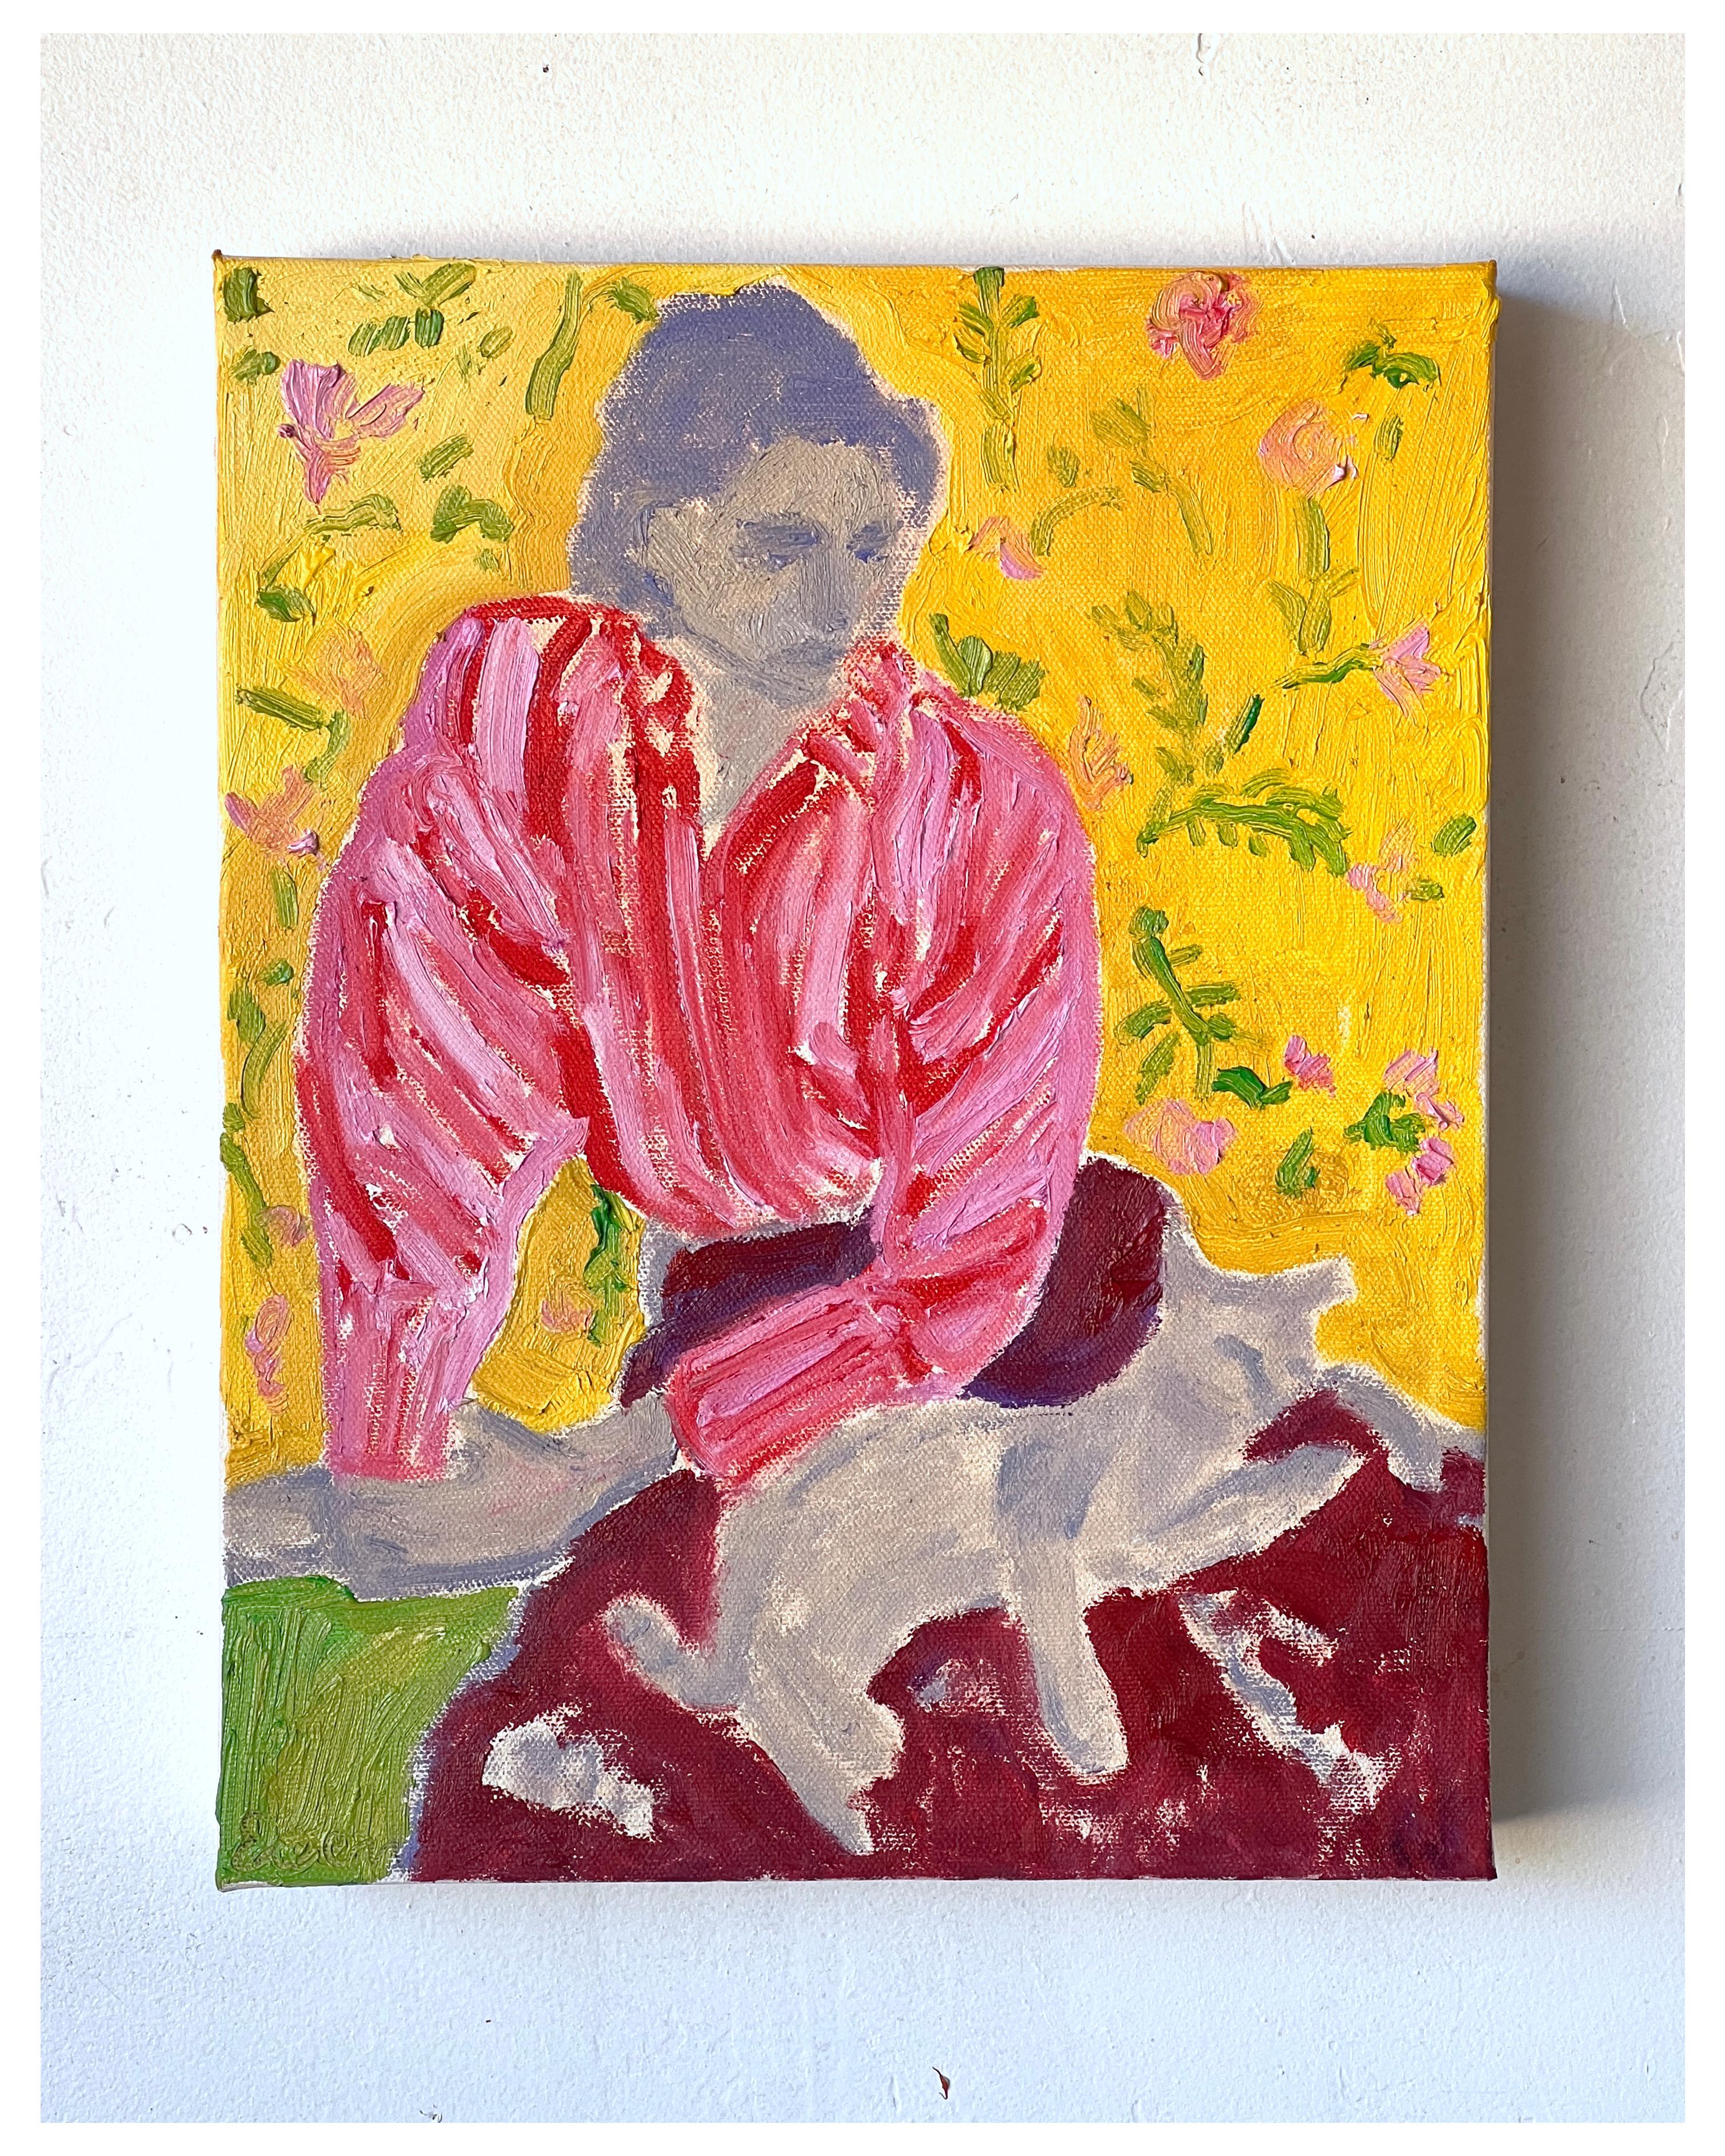 Original Cat Painting by Joshua Tree based Artist, Anne-Louise Ewen. A highly colorful portrait of a woman and her feline companion created with thick impasto strokes. A small painting that will fit in any home. 

Part of a series of 17 cat